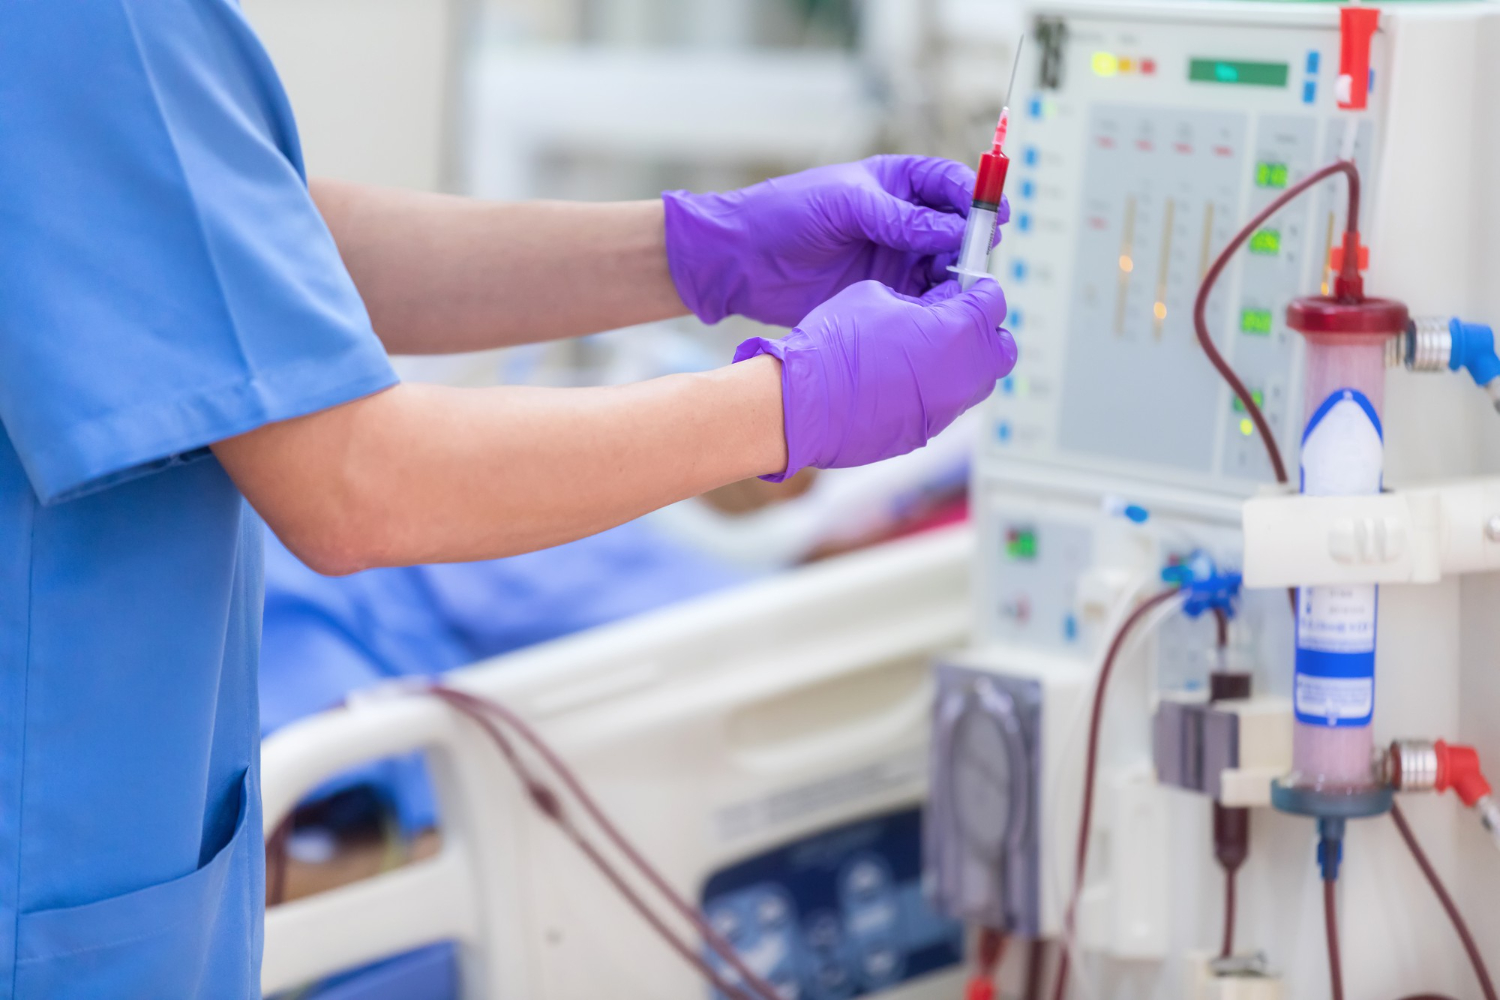 Is the job of a dialysis nurse stressful?